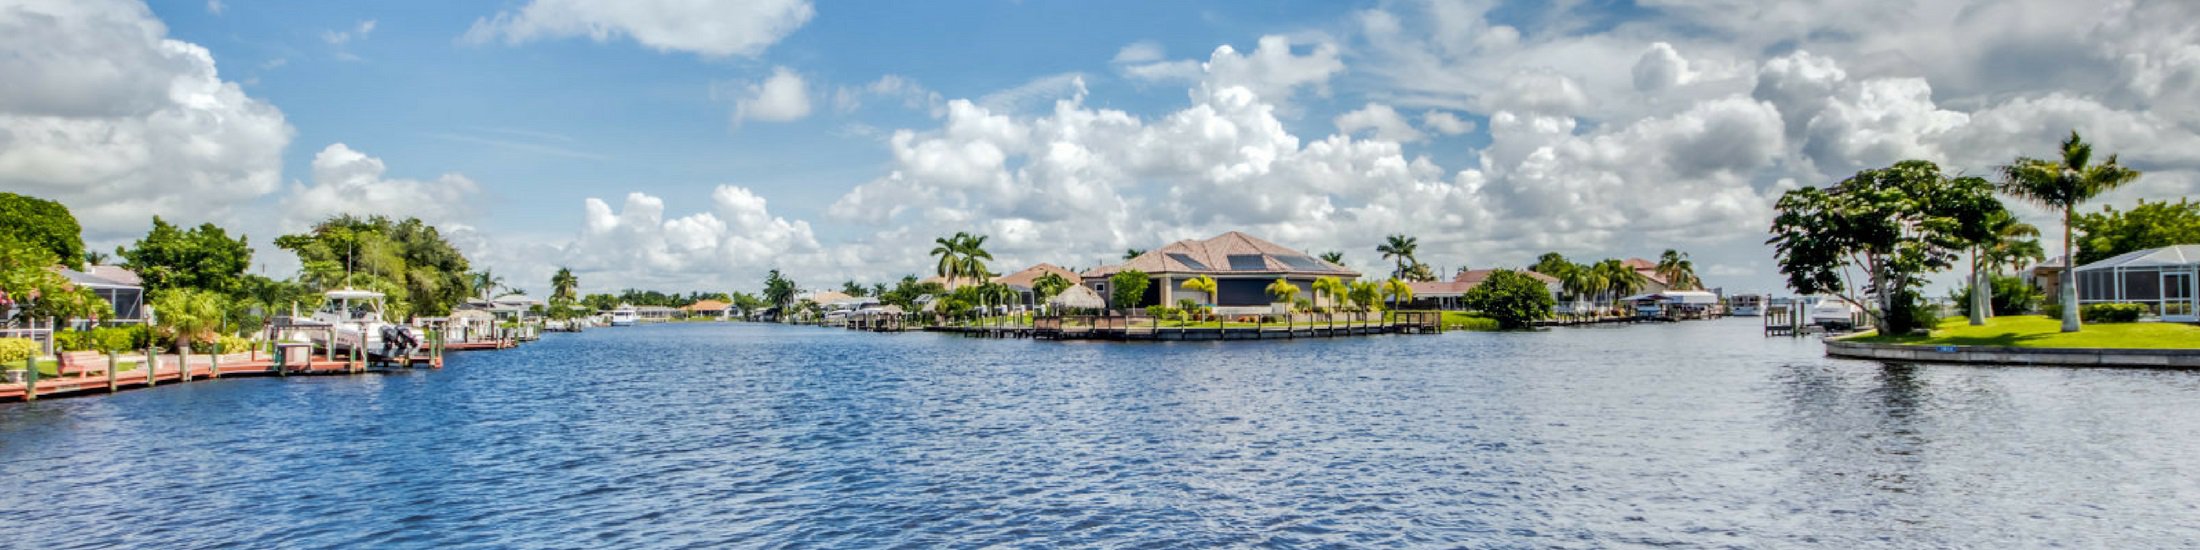 Coral Oaks Golf Course Homes for Sale